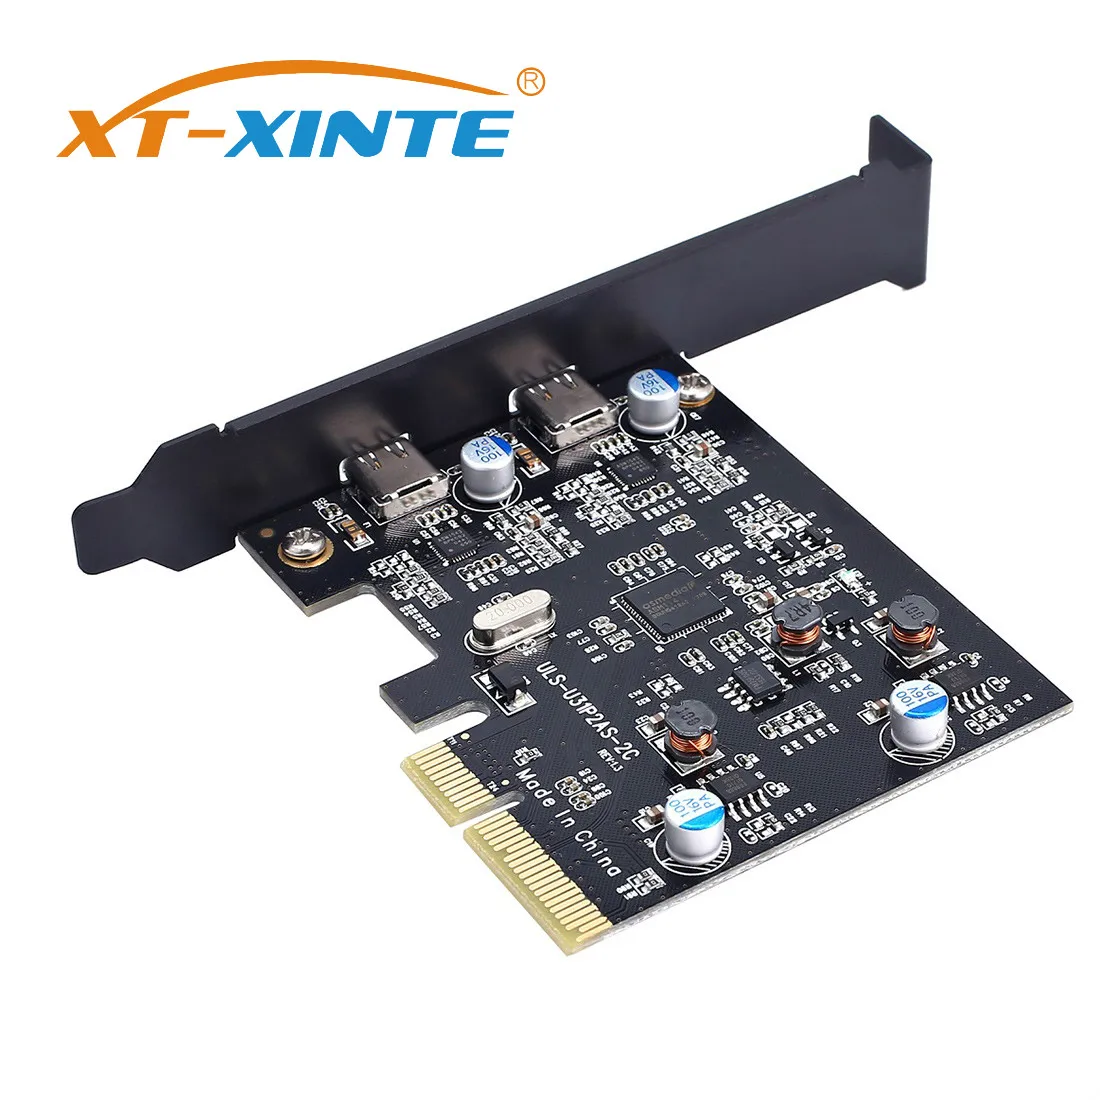 

XT-XINTE Add on Cards USB 3.1 Dual 10Gbps 2x Type-C Port PCI Express Controller Riser Card Expansion Adapter for Mac Pro Window